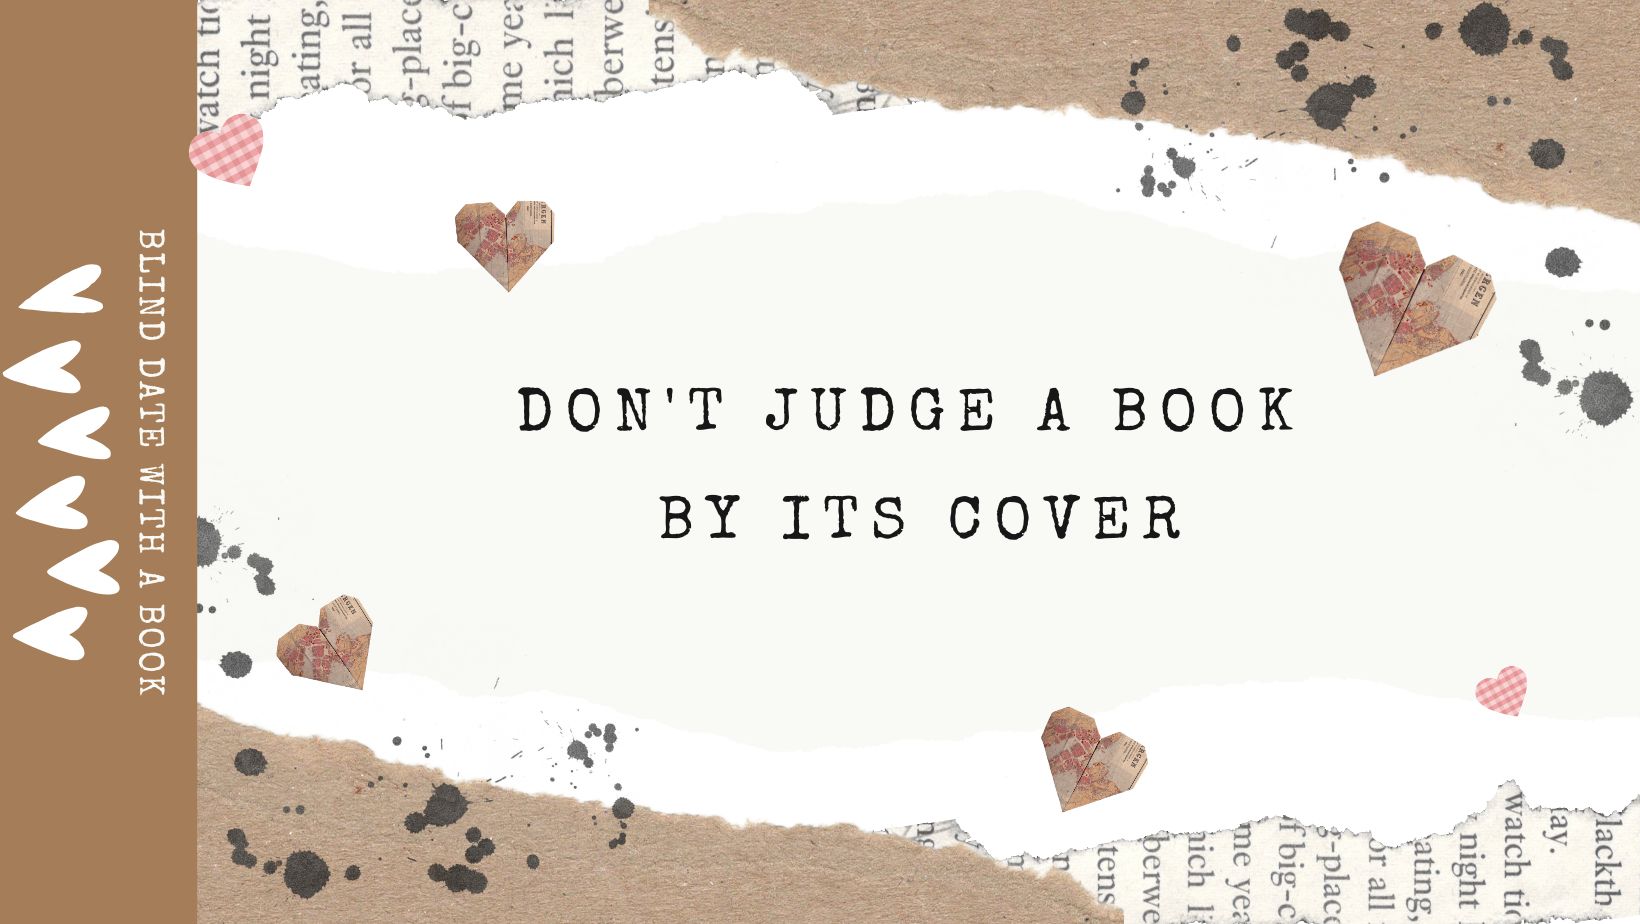 Image shows the words "Don't judge a book by its cover."